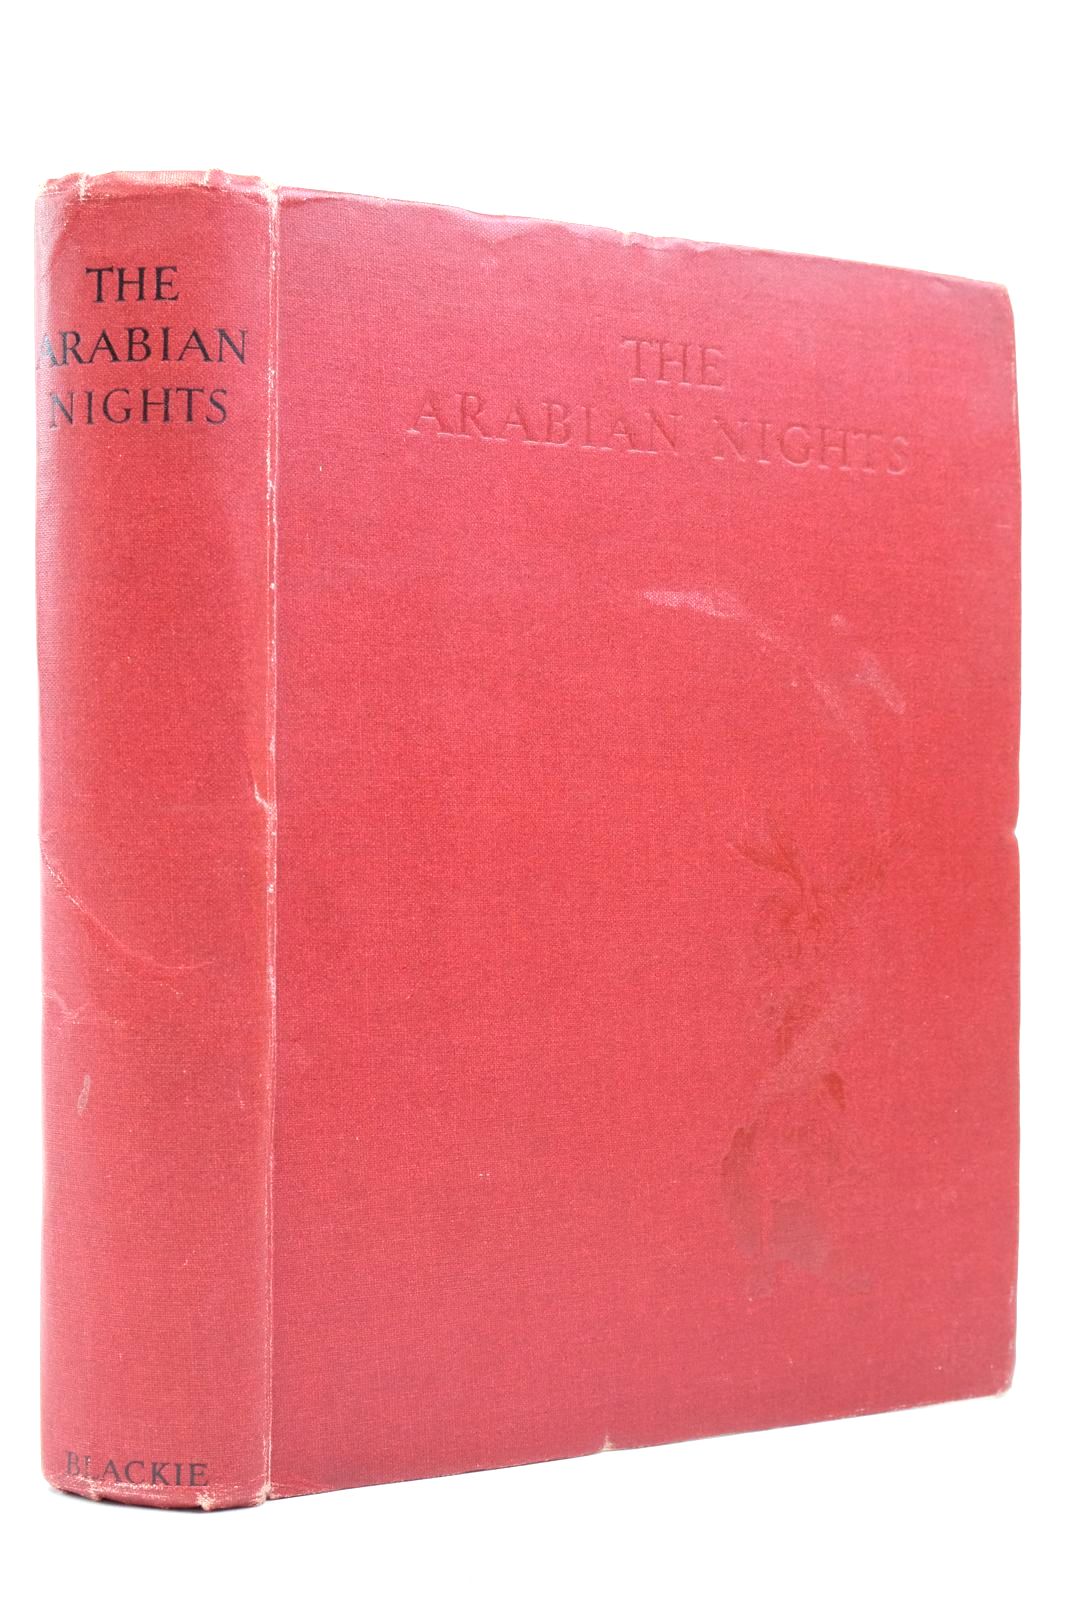 Photo of THE ARABIAN NIGHTS written by Davidson, Gladys illustrated by Bull, Rene published by Blackie & Son Ltd. (STOCK CODE: 2140890)  for sale by Stella & Rose's Books